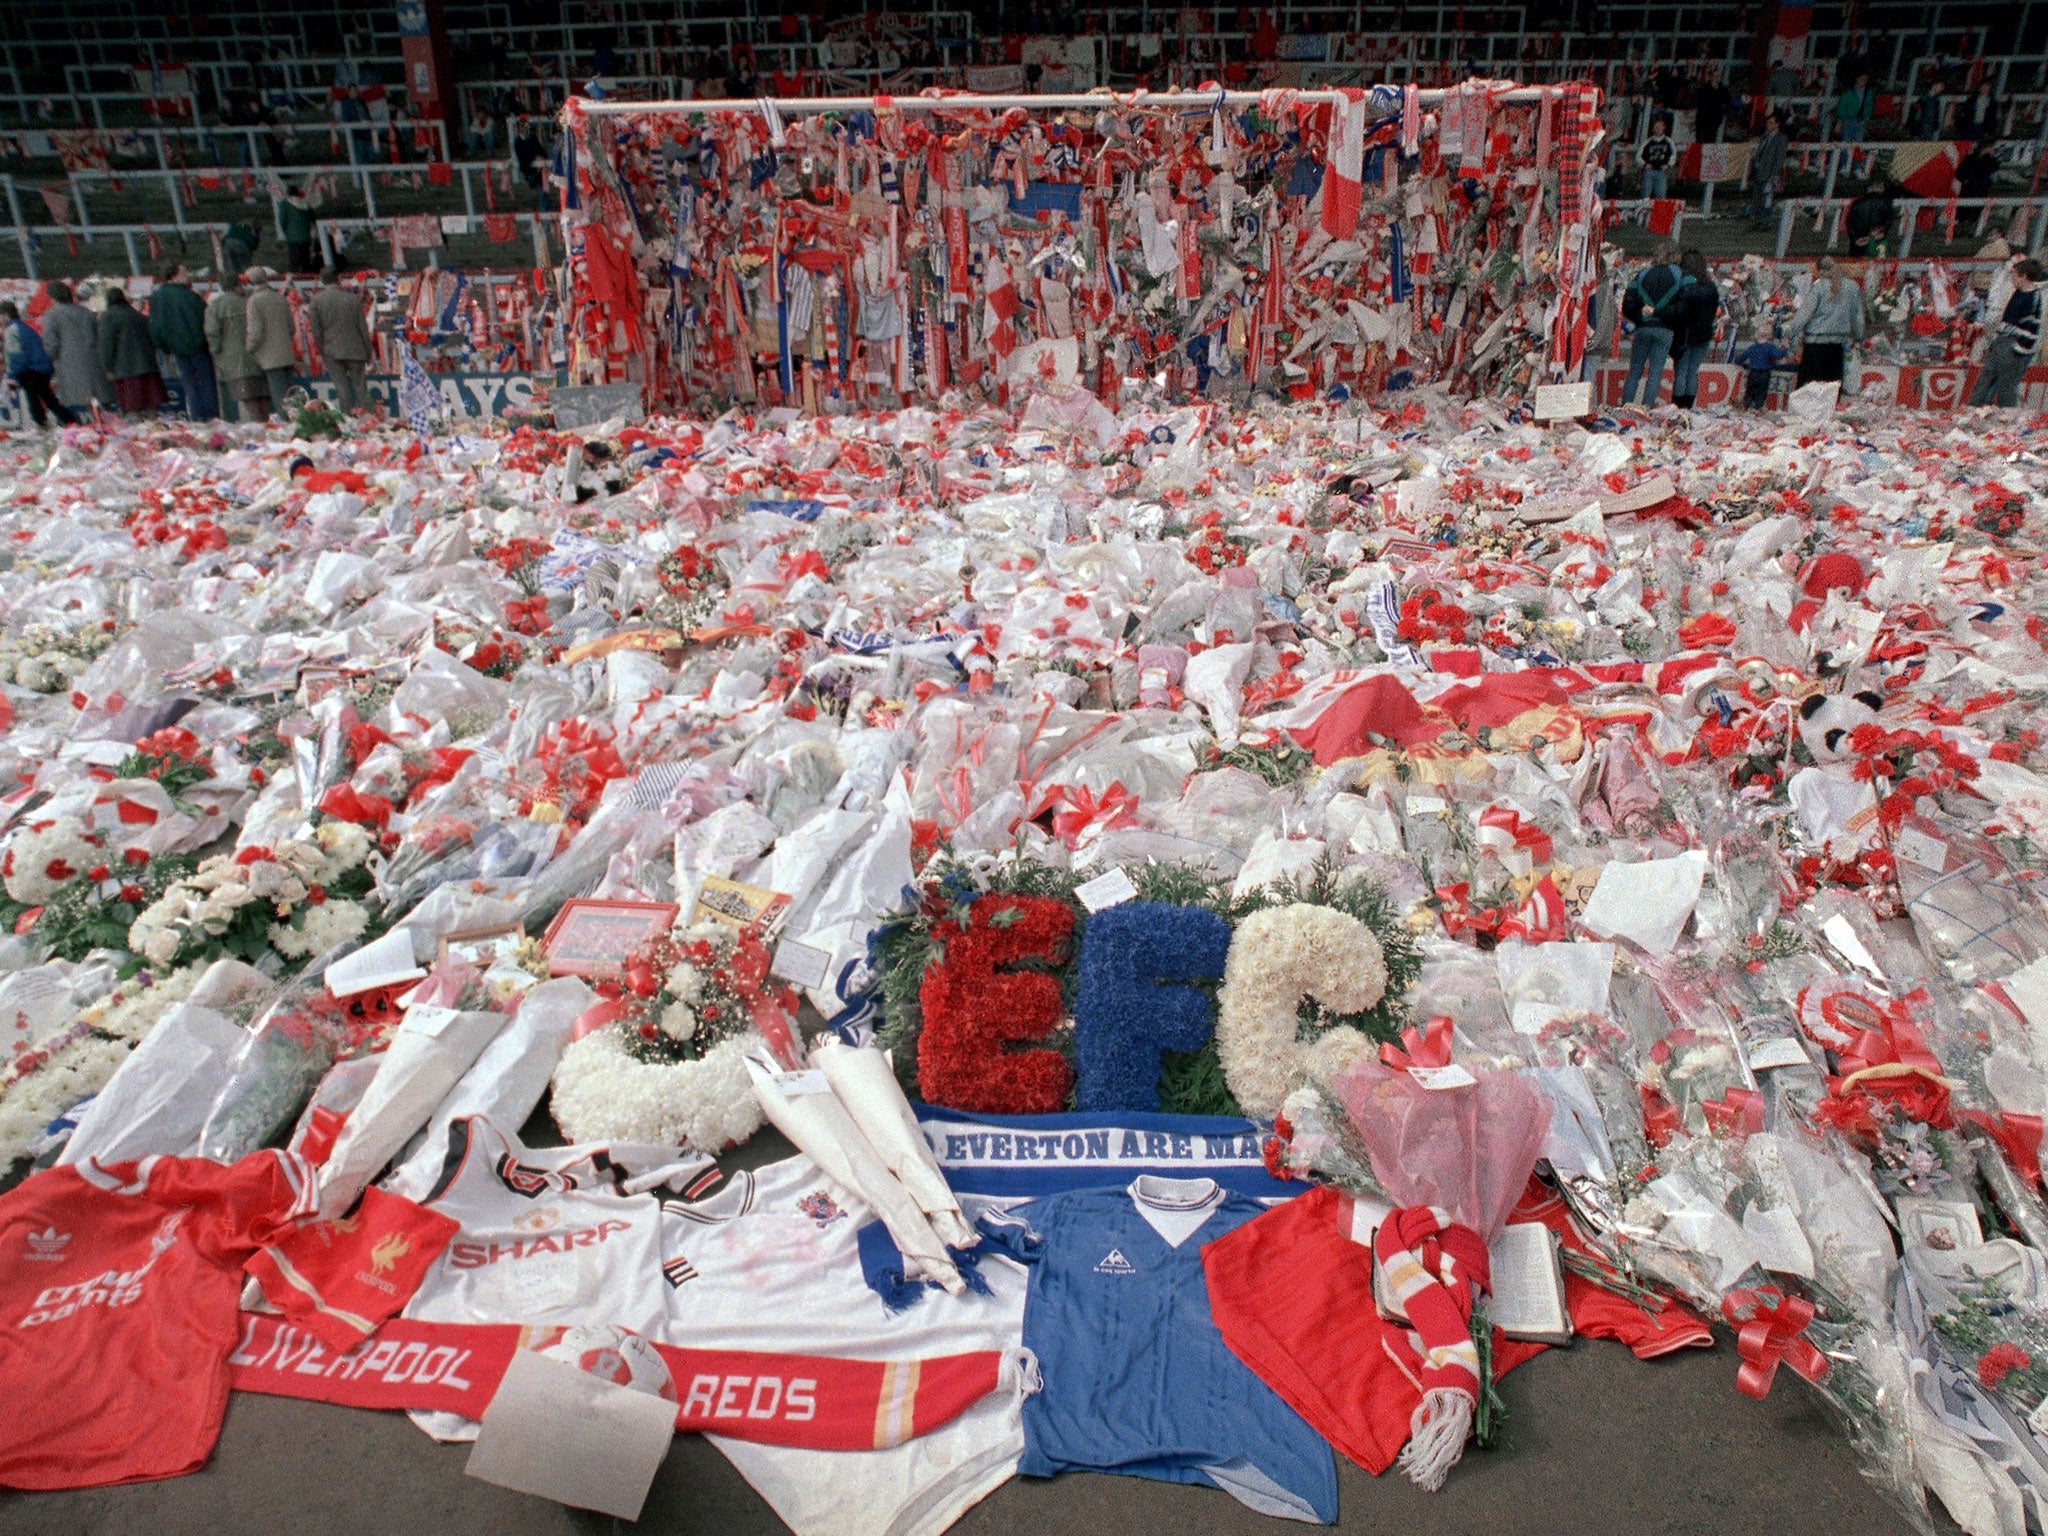 Floral tributes are placed by soccer fans at the 'Kop' end of Anfield Stadium in Liverpool on 17 April 1989 after the Hillsborough tragedy